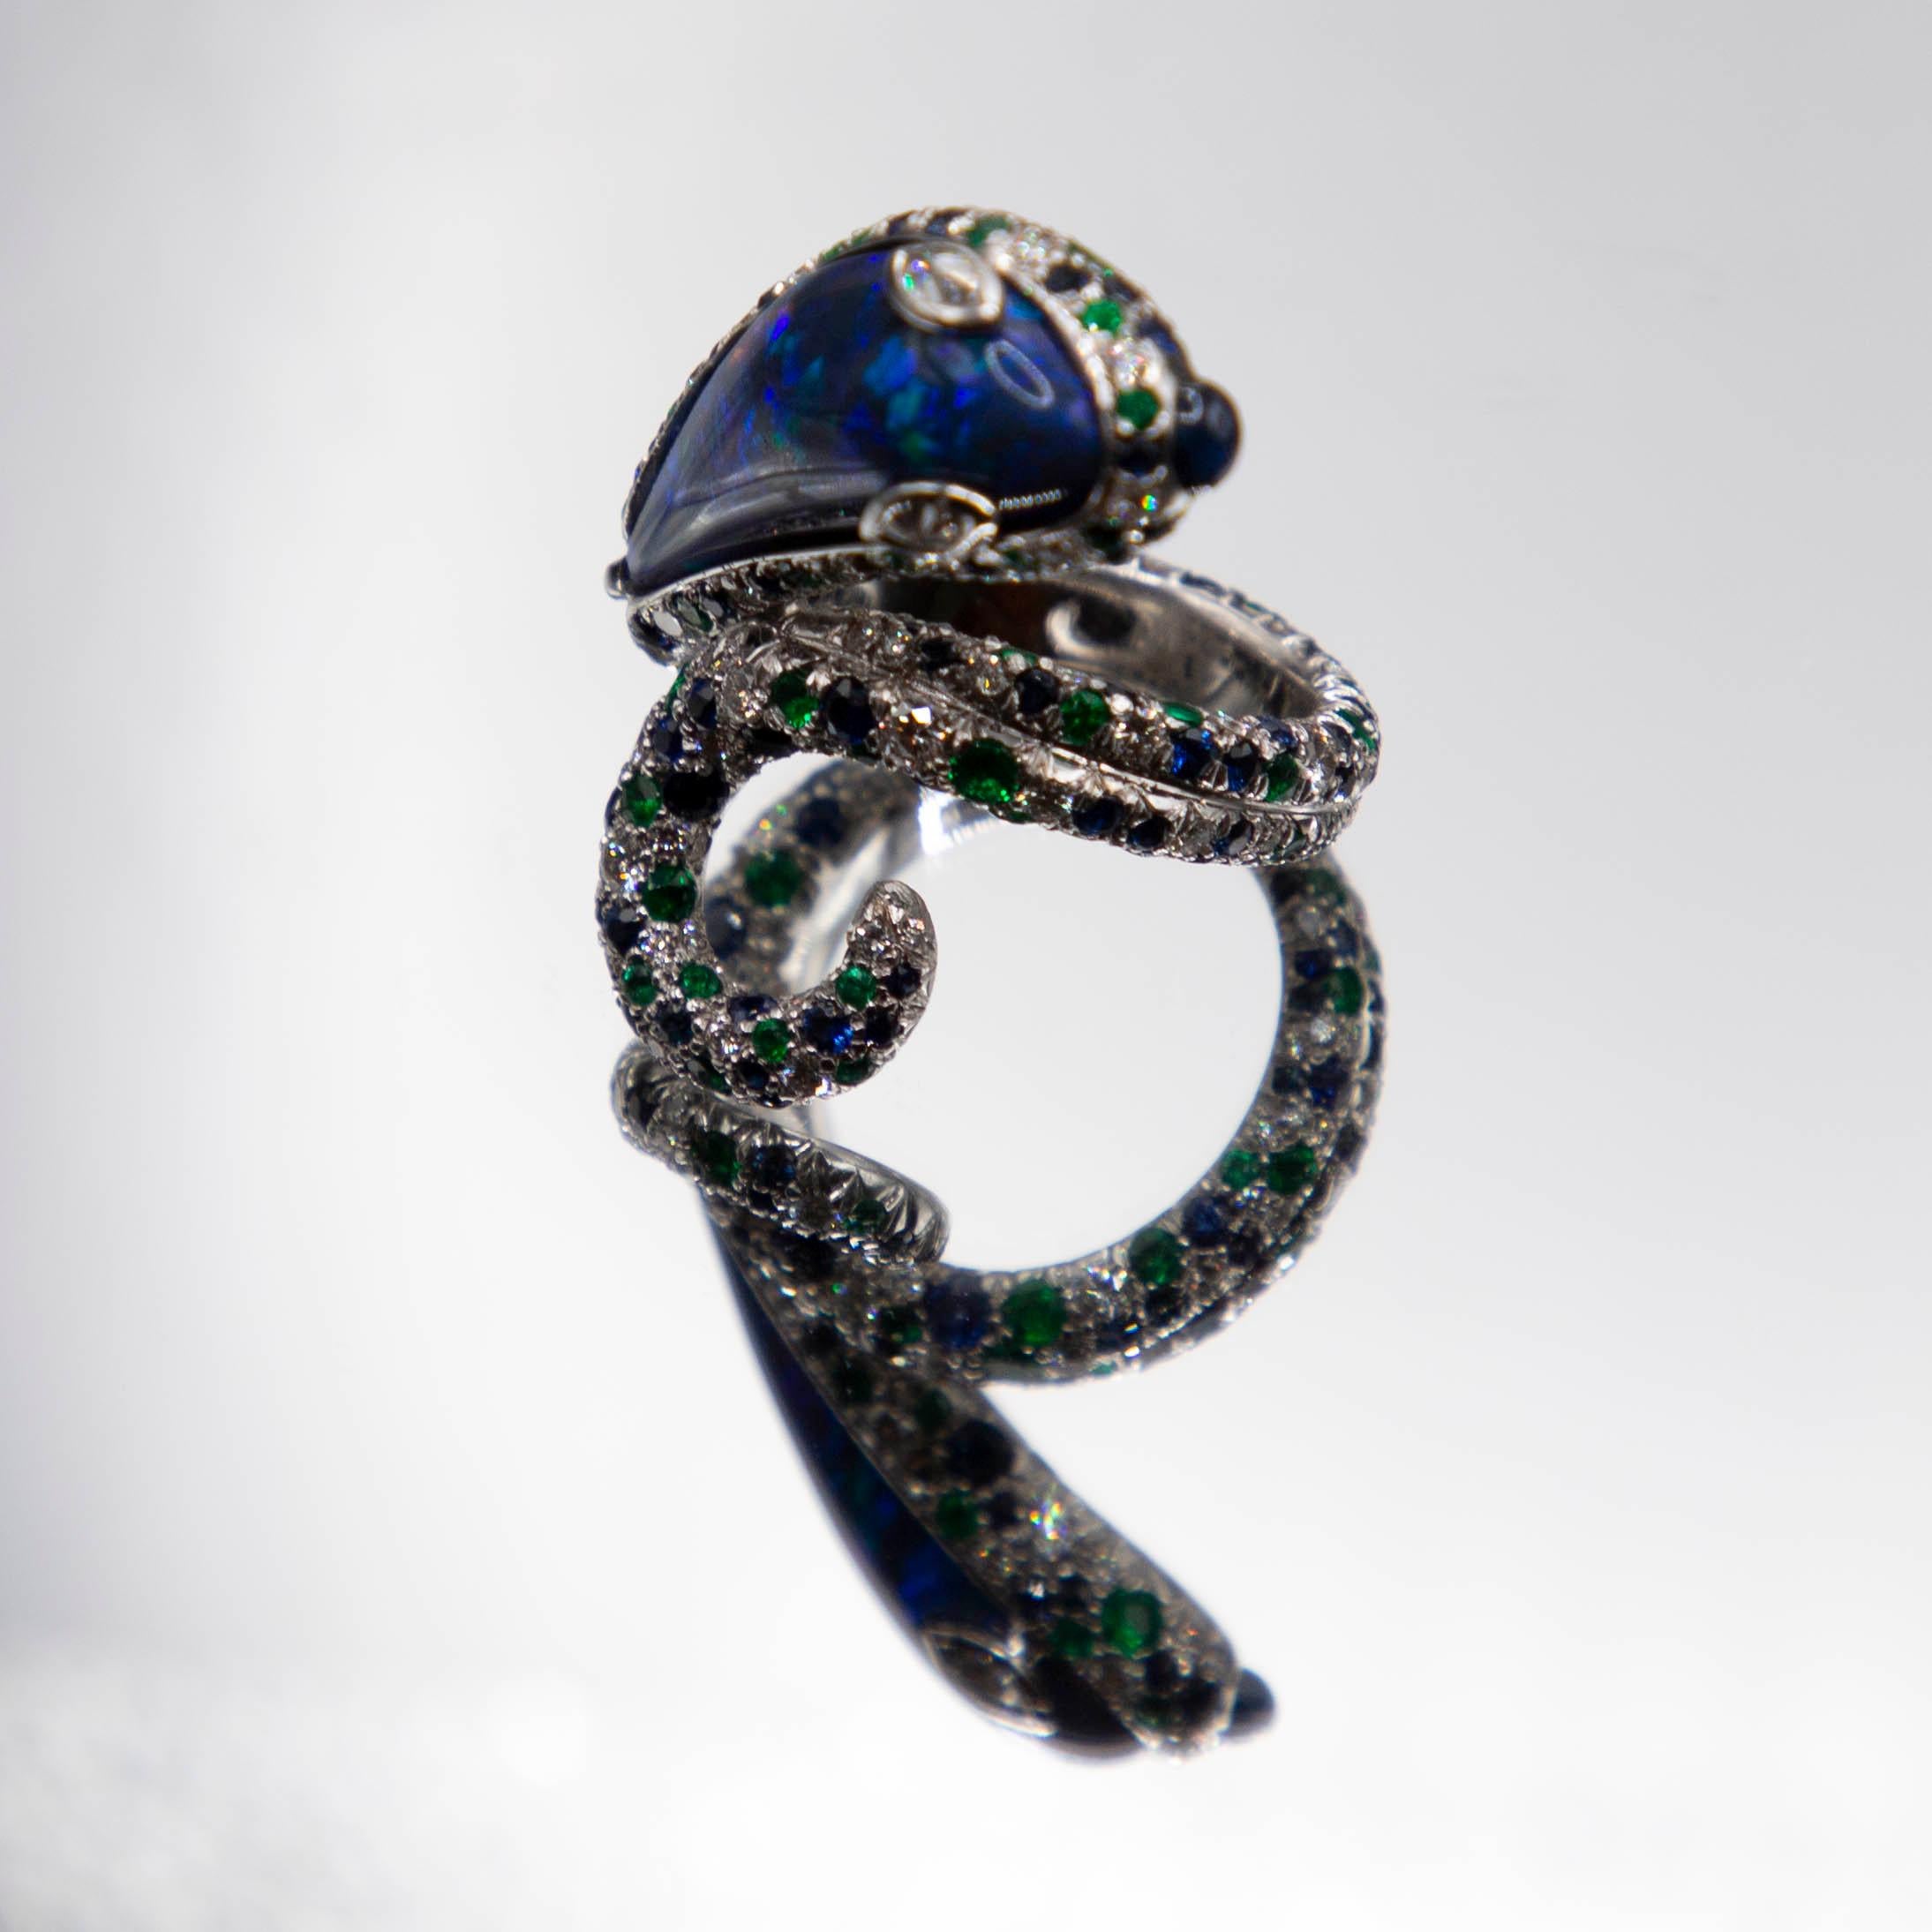 A one of a kind handmade serpent ring features one of the world's finest Black Opals from Lightning Ridge Australia, weighing 7.61 carats. The gem, an exceedingly rare blue/black, was hand carved to an exquisite flowing form which evolved